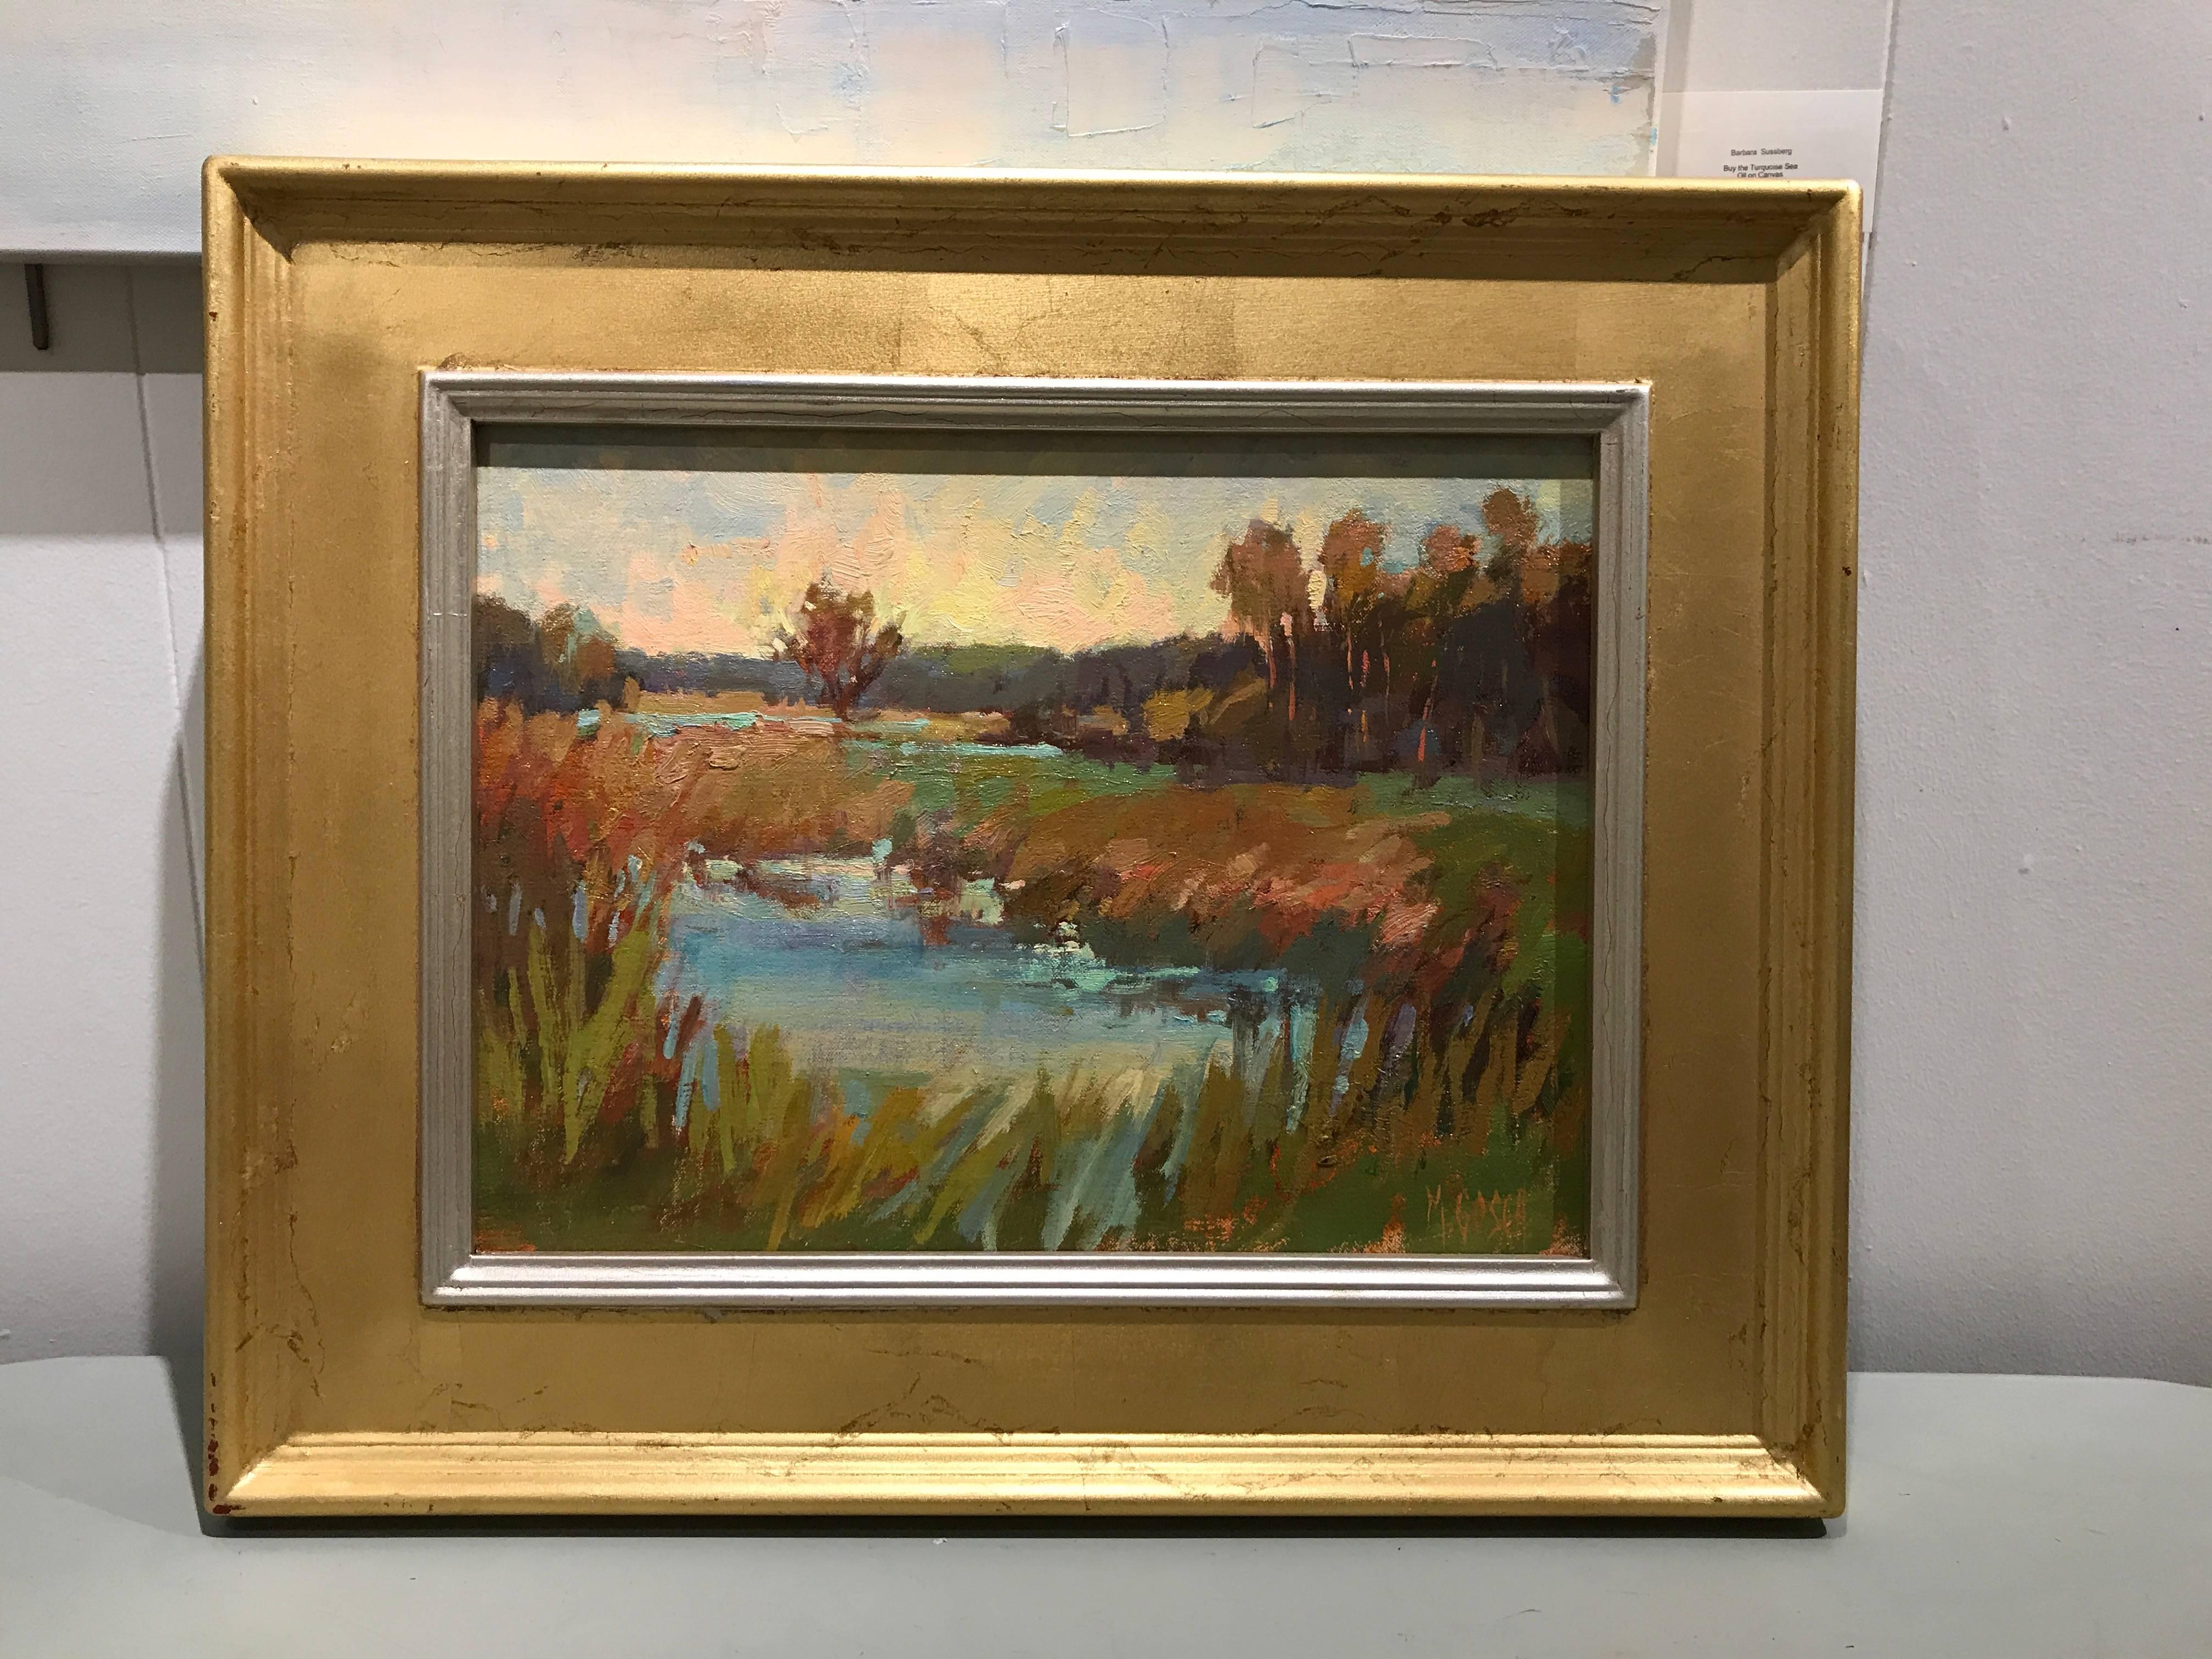 'Morning's Beauty' Small Framed Impressionist Oil on Board Landscape Painting 2